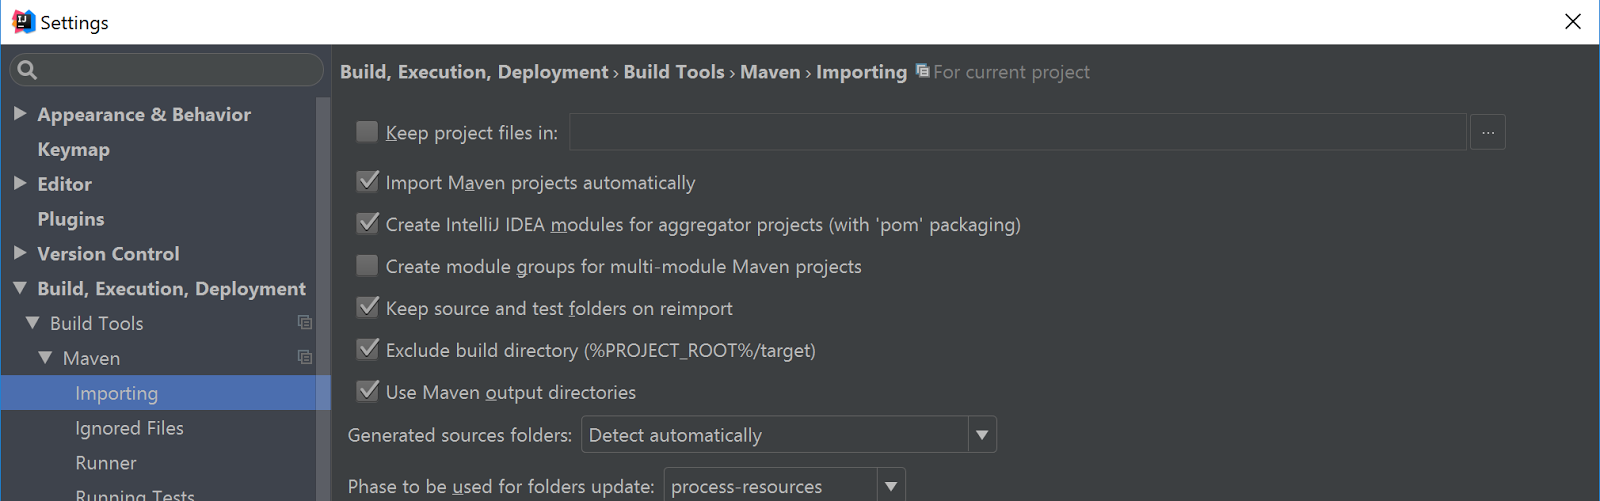 import-maven-projects-automatically.png